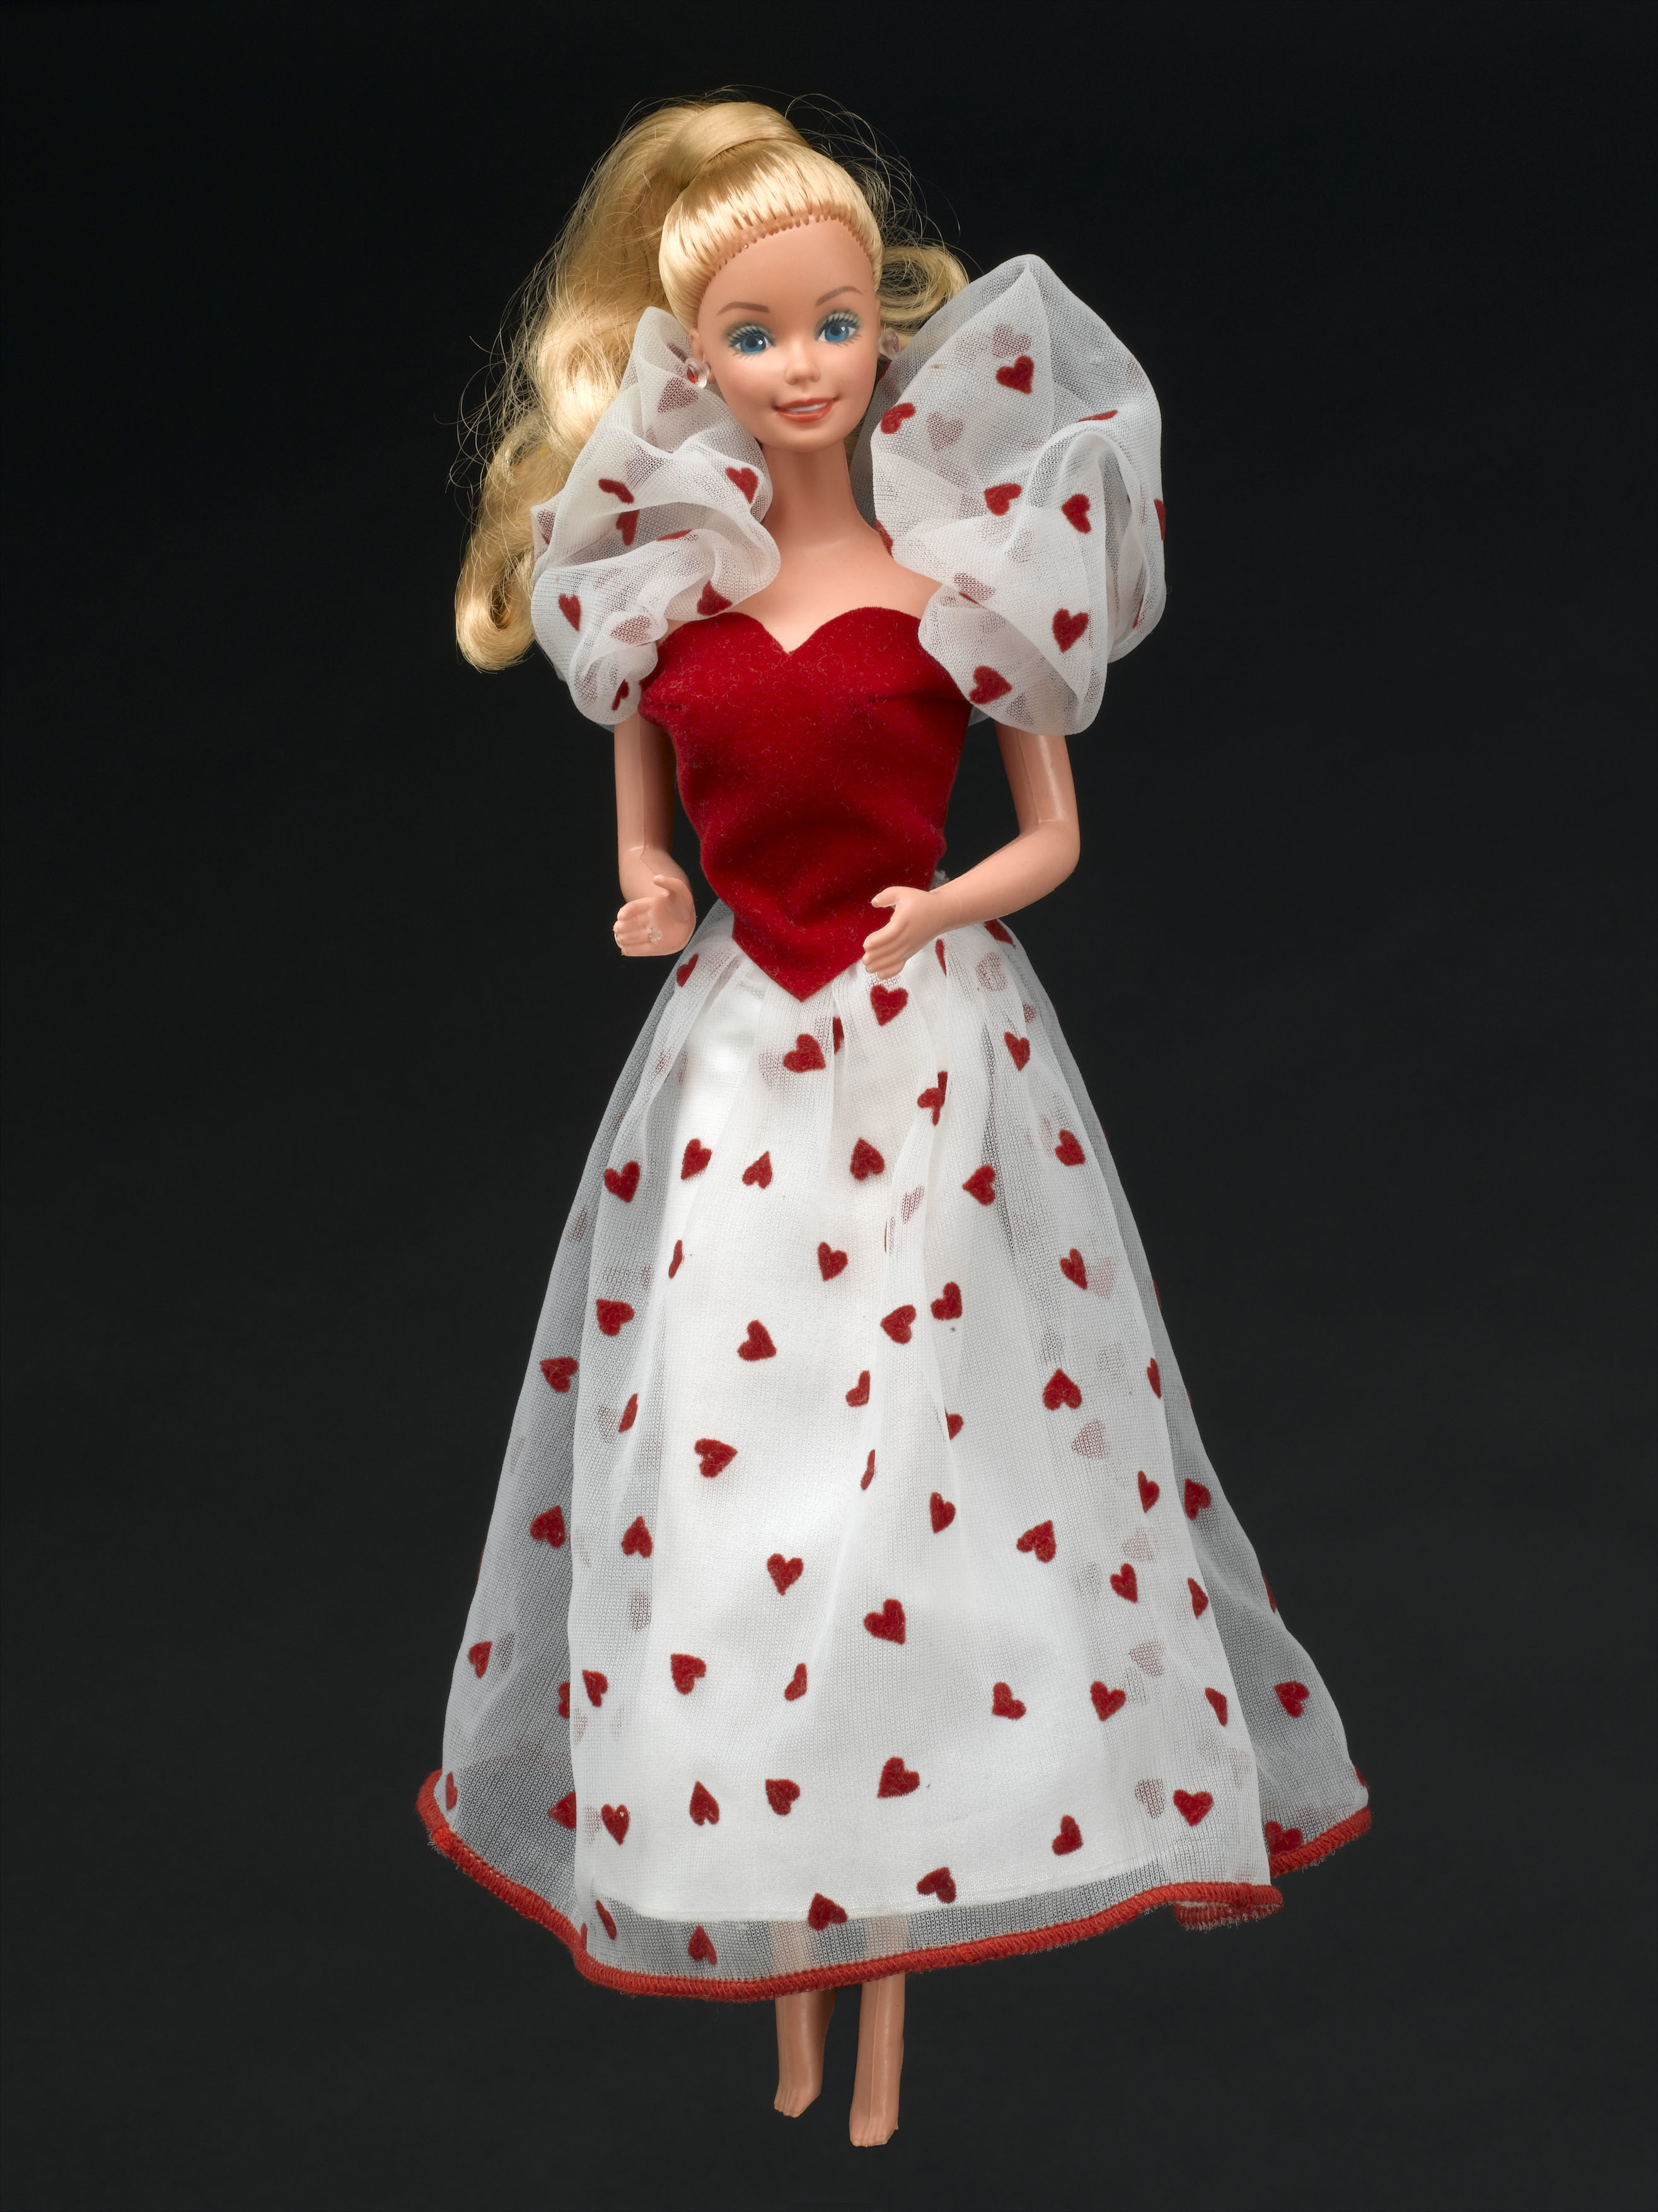 Barbie doll, by Mattel, 1980s. Plastic doll, white skinned, with shoulder-length blonde hair, in long skirt of hearts pattern, and red sleeveless top and white tulle stole with hearts